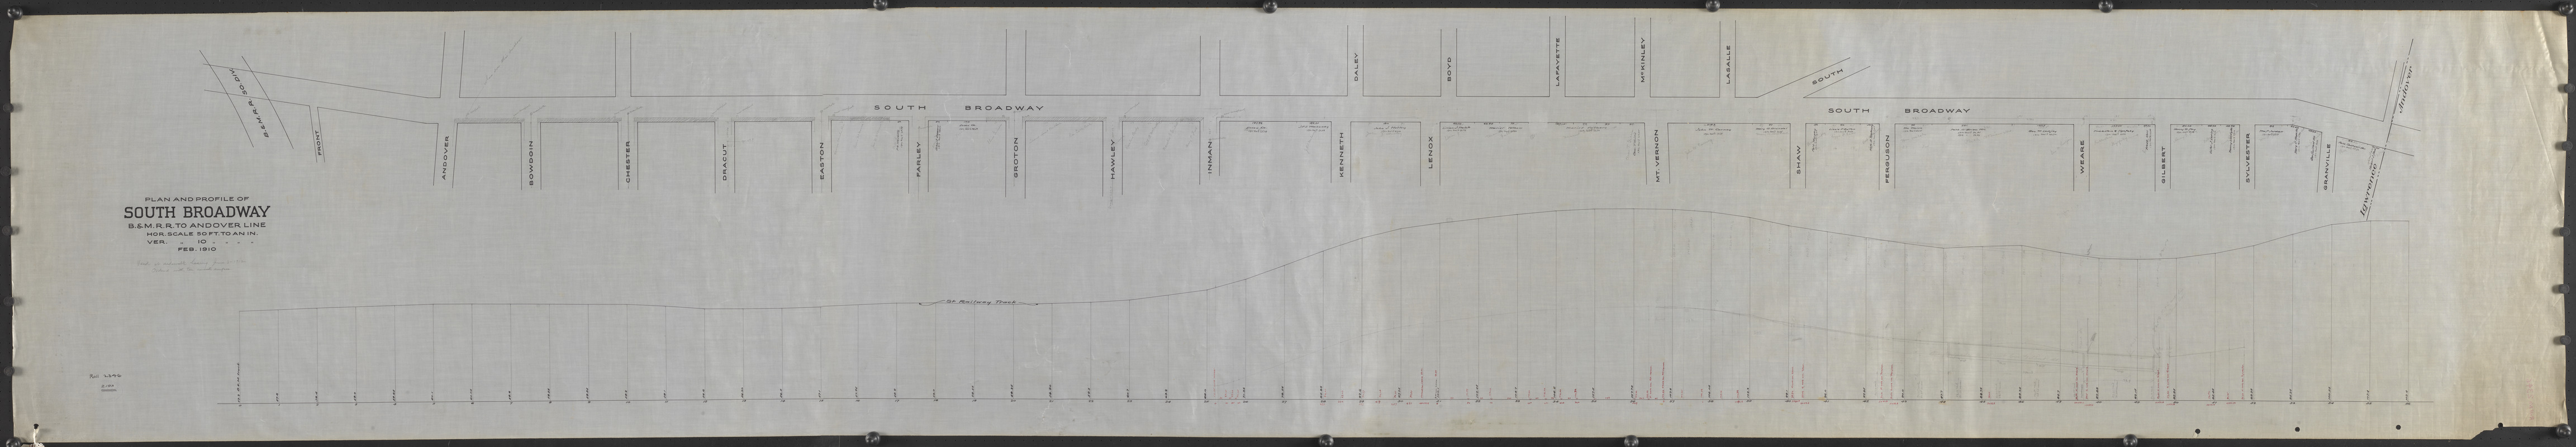 Plan and profile of South Broadway, B. & M. R. R. to Andover Line